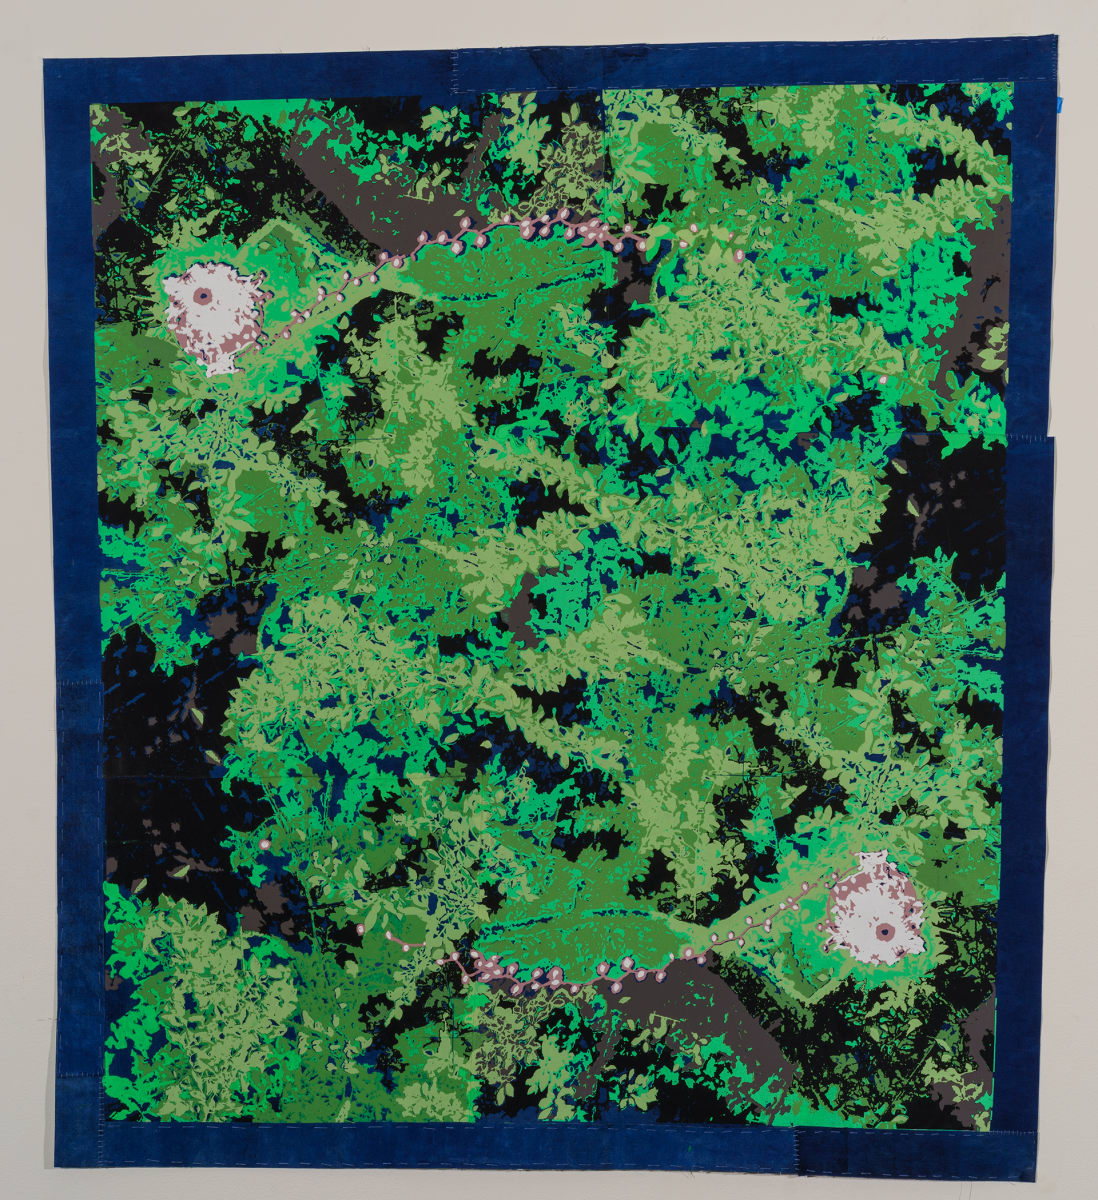 Mama's Patio by Emma Treadwell  Image: Collage of four individual multi-layered silk screen prints on Indigo-dyed Silk Charmeuse. Each printed color represents one layer. Each layer requires one screen. This print uses 8 screens.